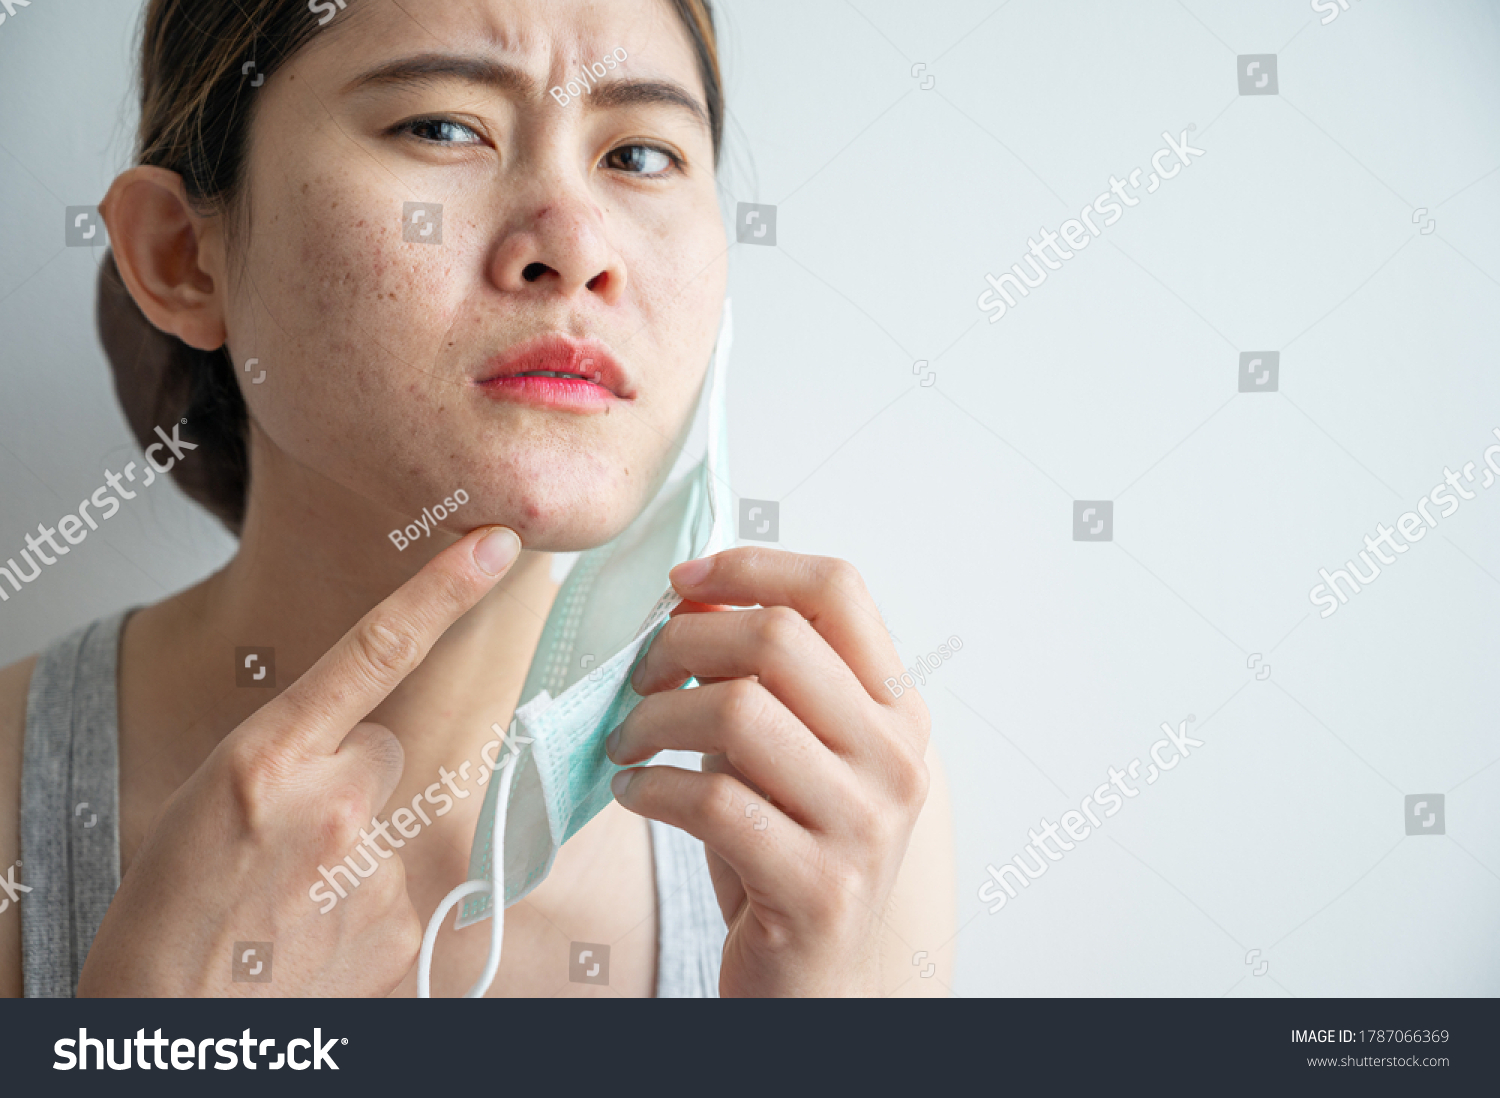 Asian woman worry about acne occur on her face after wearing mask for long time during covid-19 pandemic. Wearing mask for prolonged periods can damage the skin. #1787066369